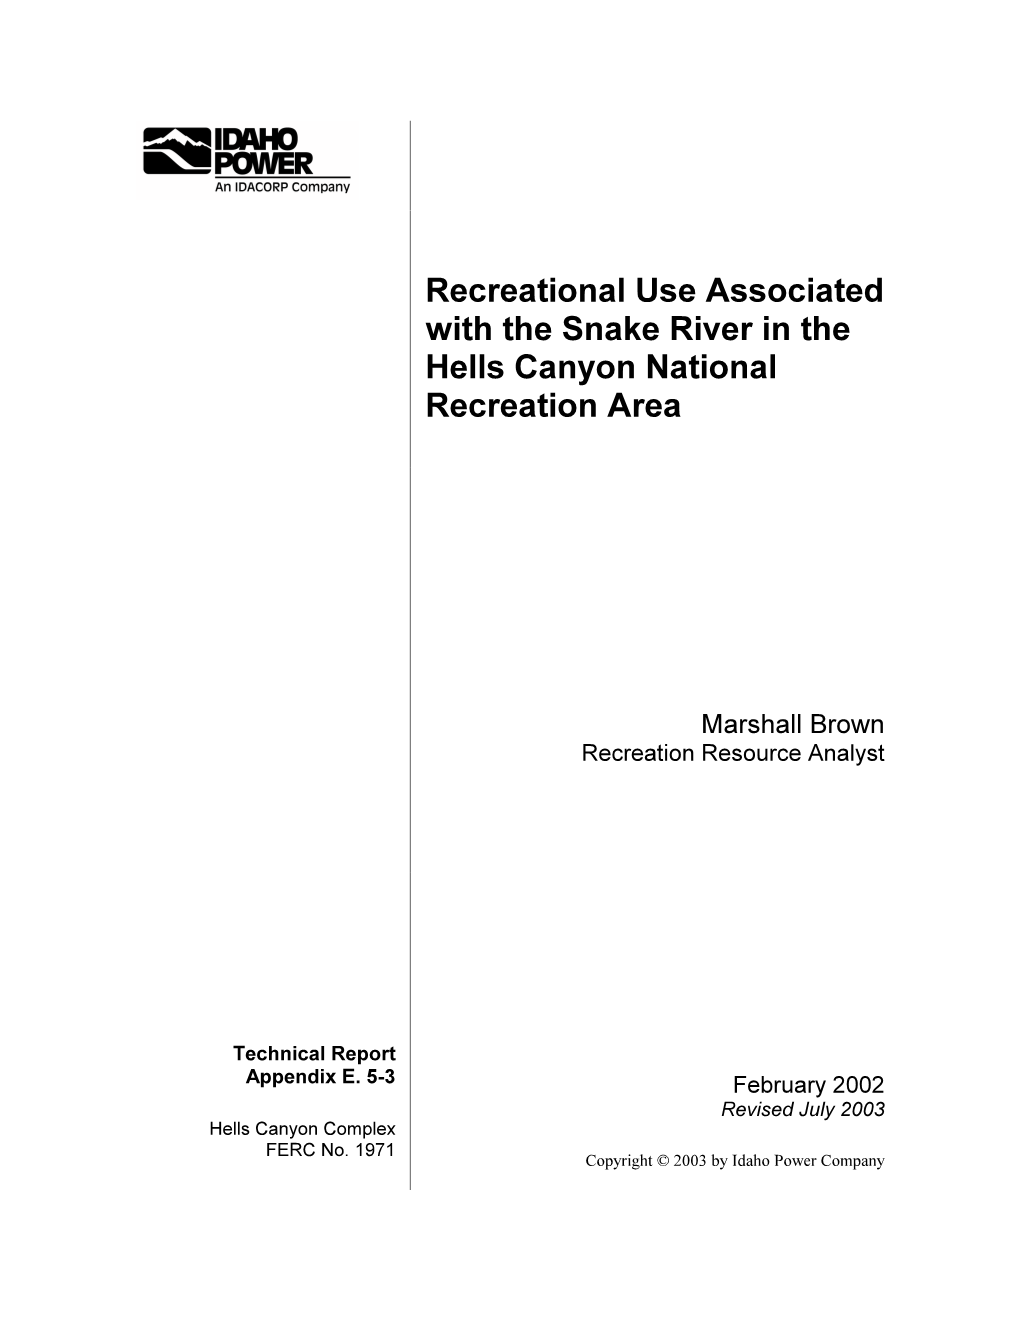 Recreational Use Associated with the Snake River in the Hells Canyon